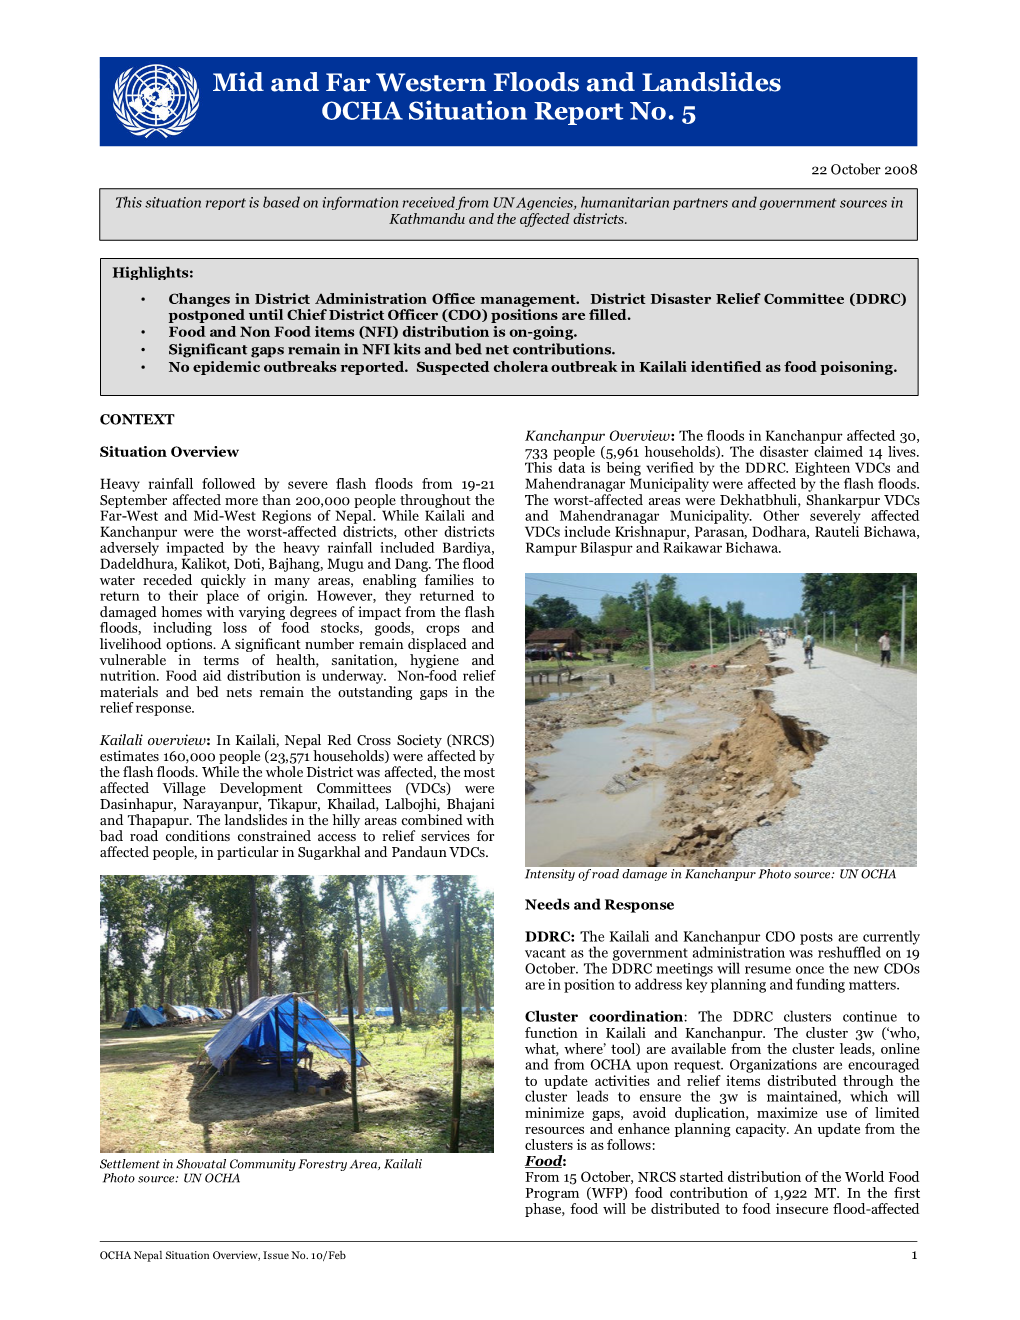 OCHA Nepal Situation Overview, Issue No